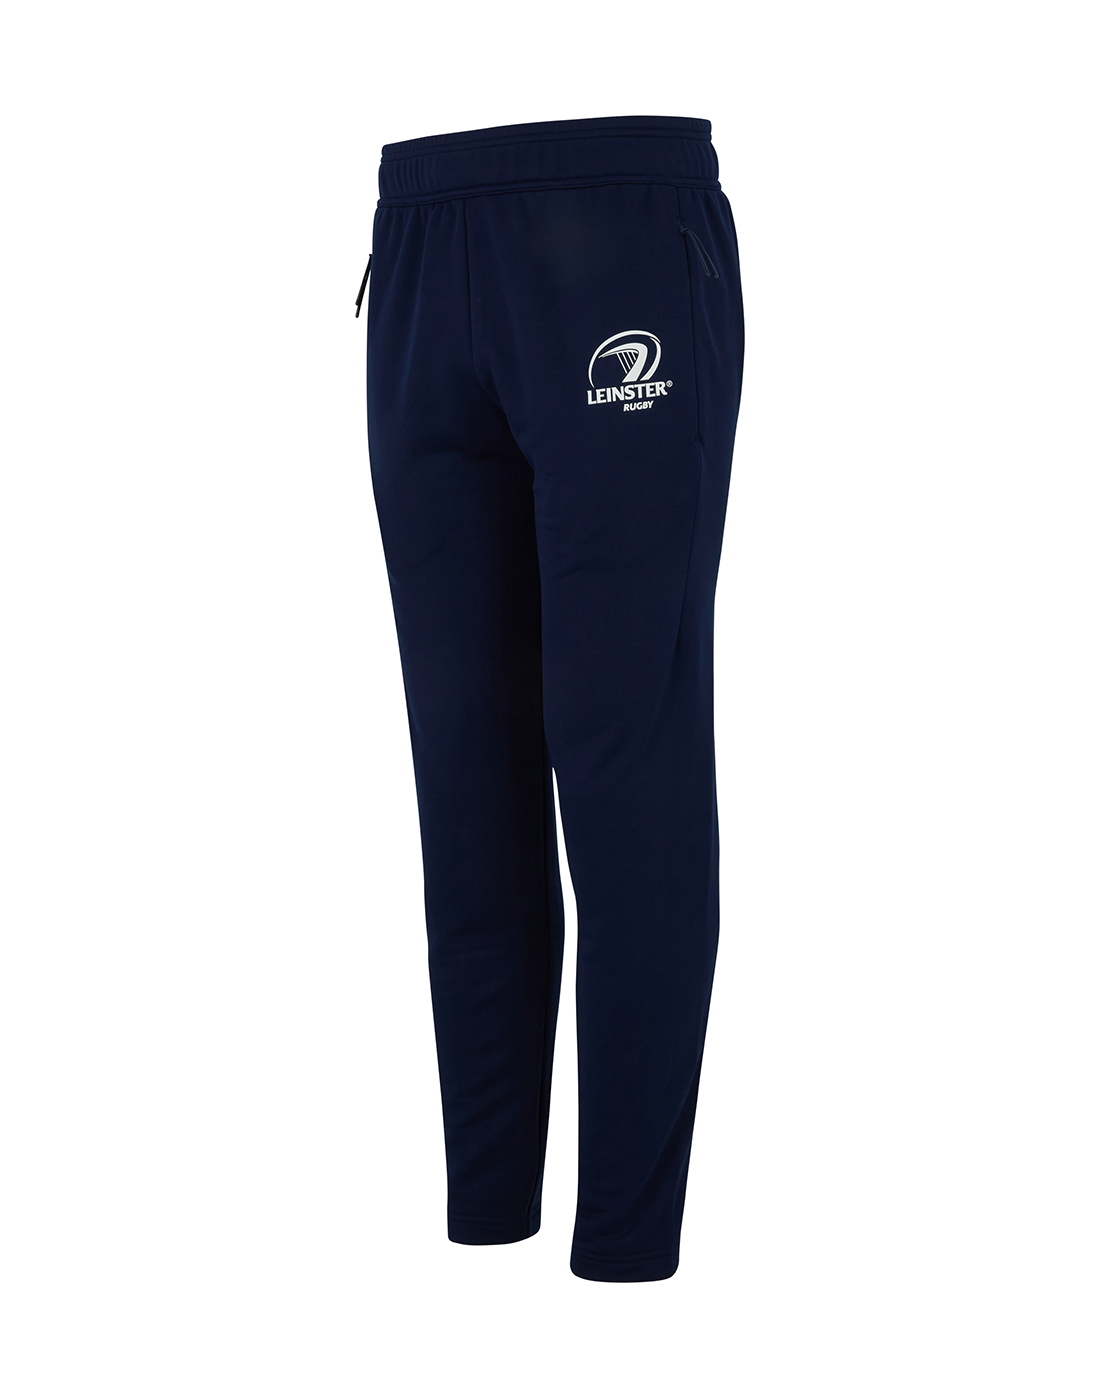 adidas Kids Leinster Training Pants - Navy | Life Style Sports IE